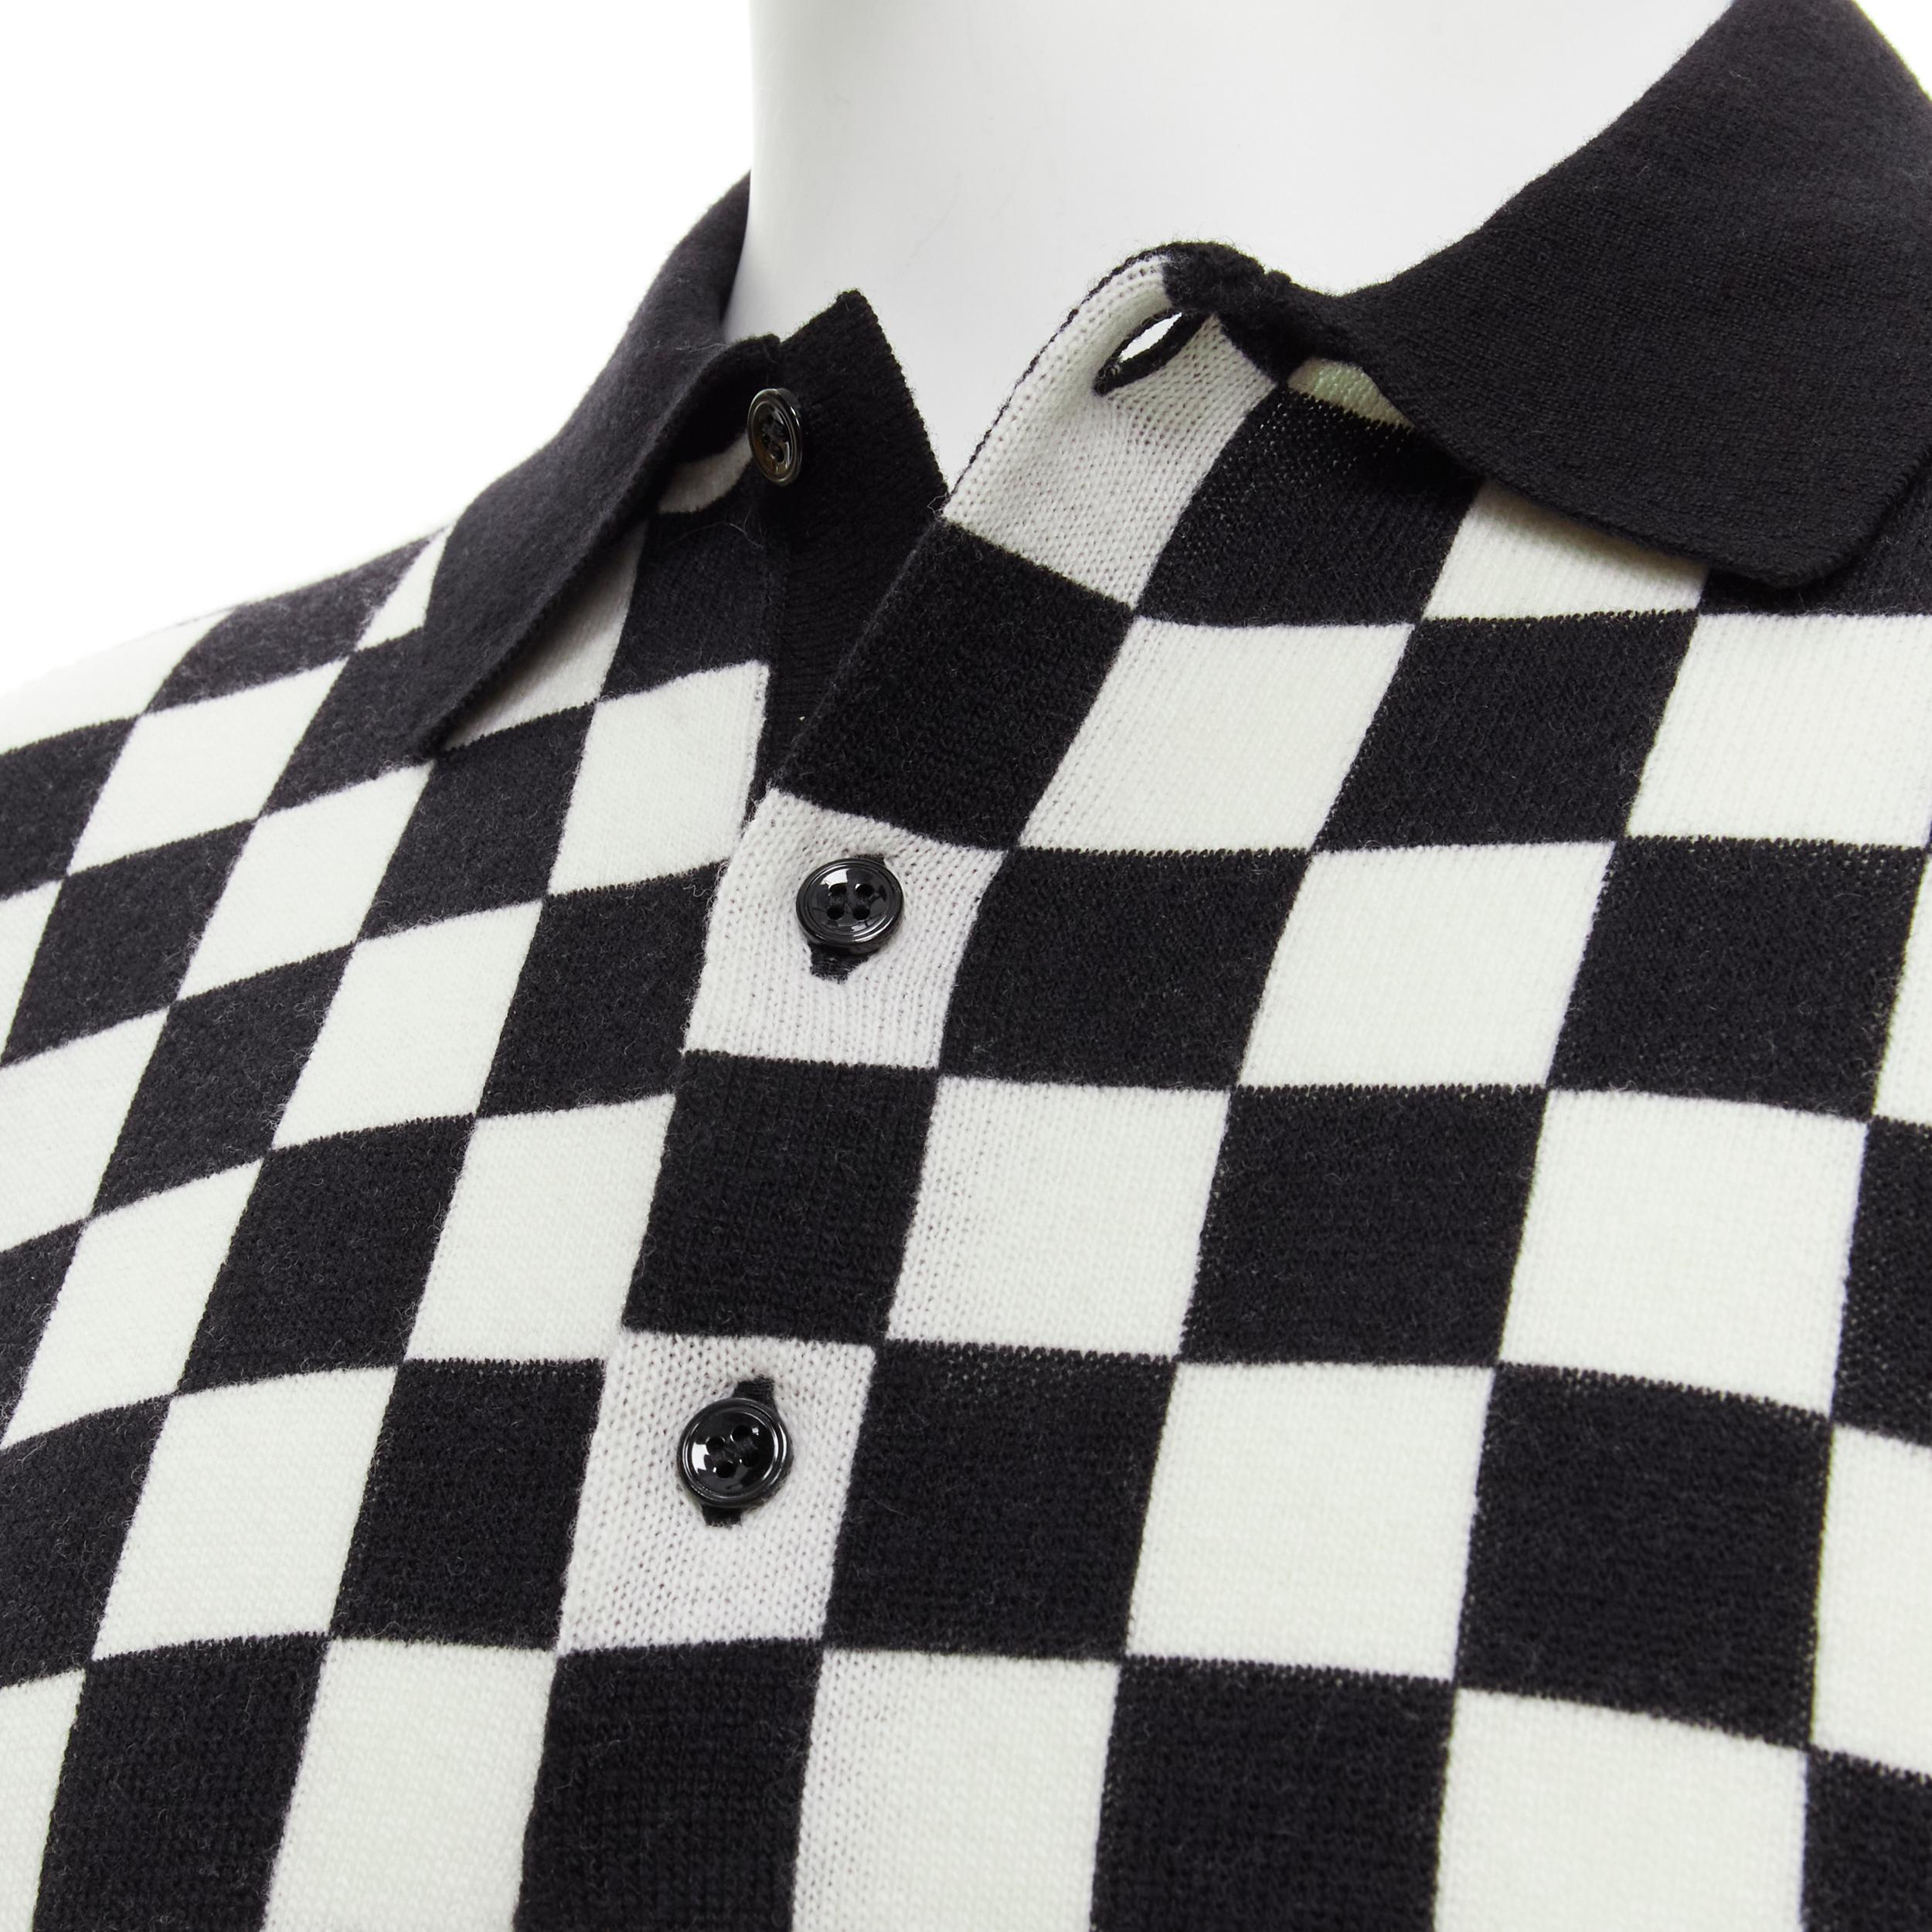 new CELINE Hedi Slimane 2019 Runway black white Damier checkered polo sweater M 
Reference: TGAS/B01978 
Brand: Celine 
Designer: Hedi Slimane 
Collection: Spring Summer 2019 Runway 
Material: Wool 
Color: Black 
Pattern: Checked 
Extra Detail: From